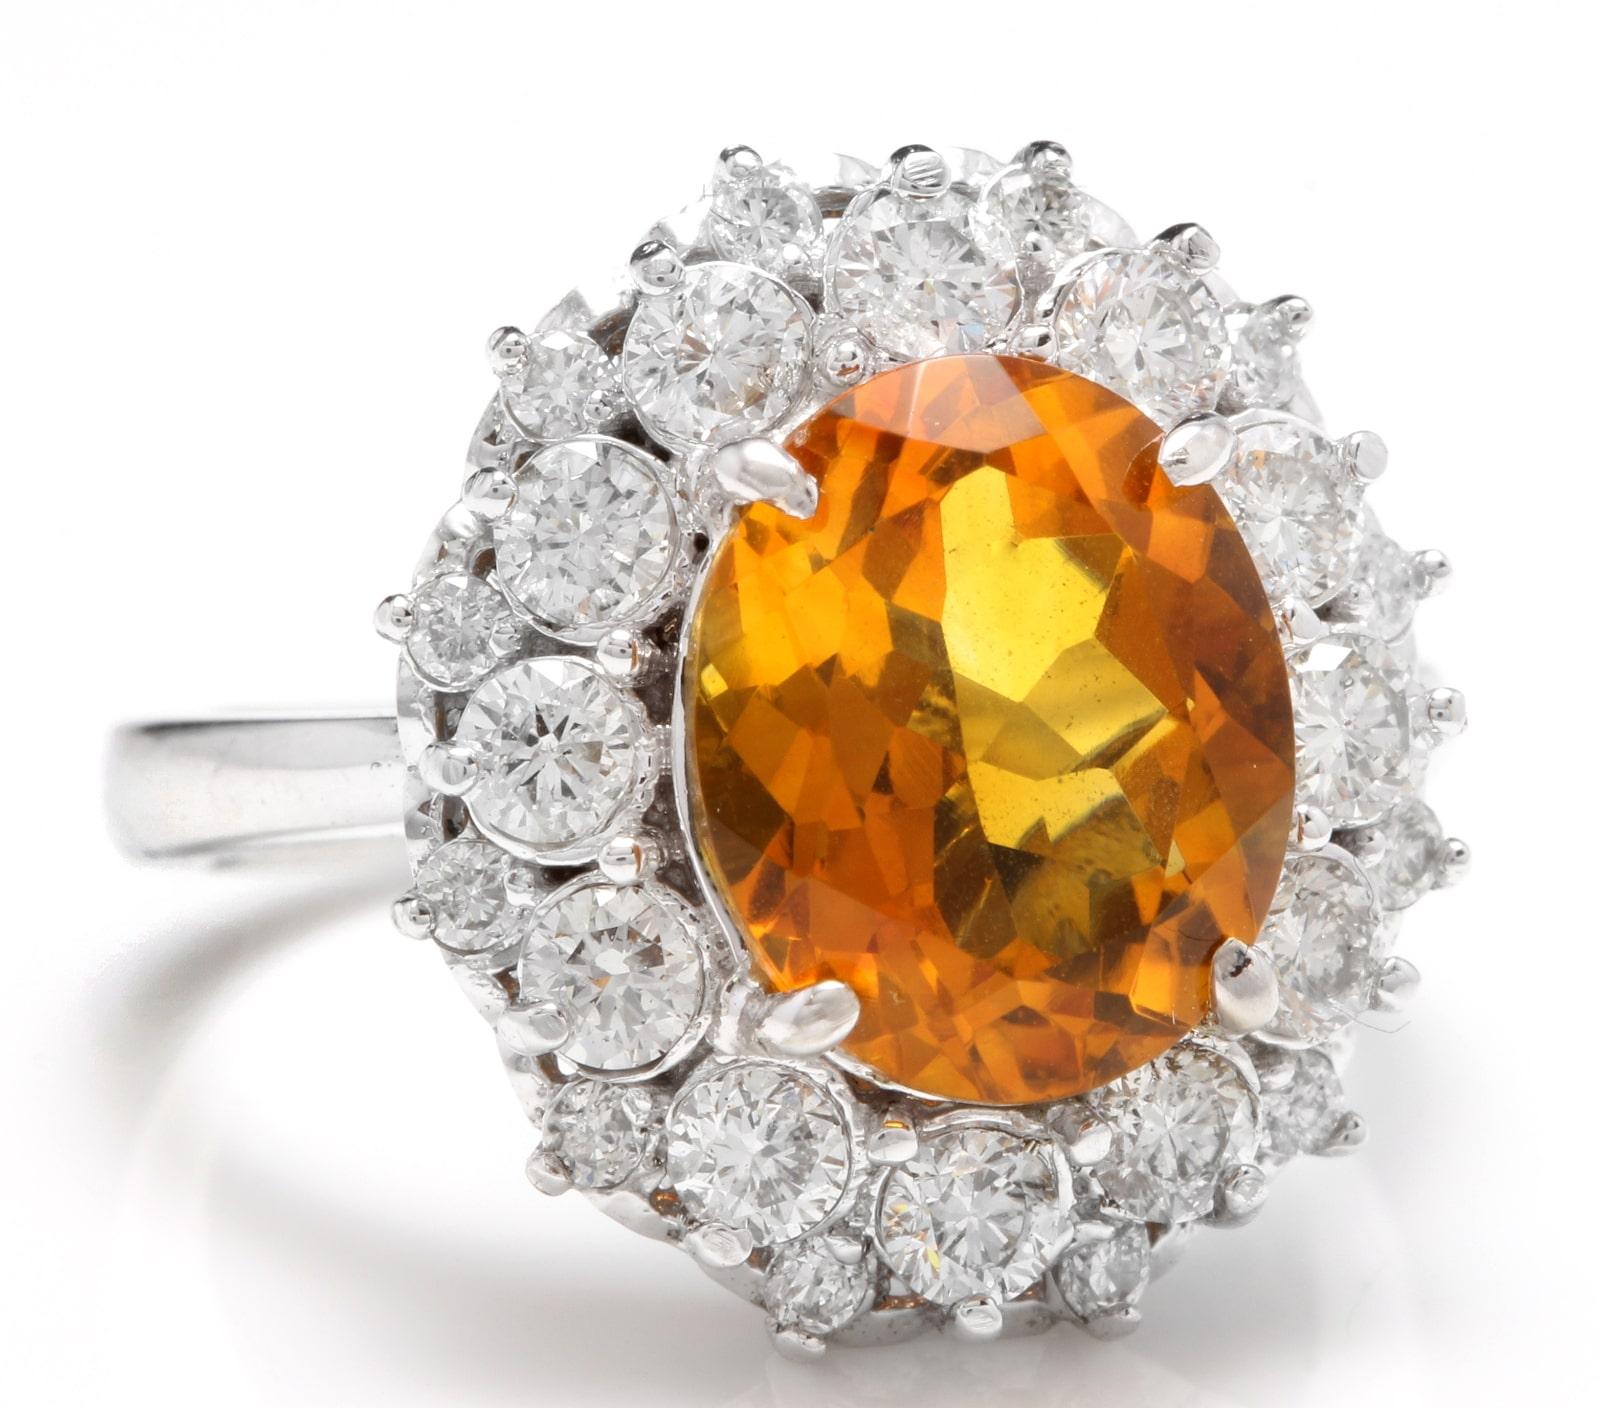 4.75 Carats Exquisite Natural Madeira Citrine and Diamond 14K Solid White Gold Ring

Total Natural Citrine Weight is: Approx. 3.50 Carats

Citrine Measures: Approx. 11.00 x 9.00mm

Natural Round Diamonds Weight: Approx. 1.25 Carats (color G-H /